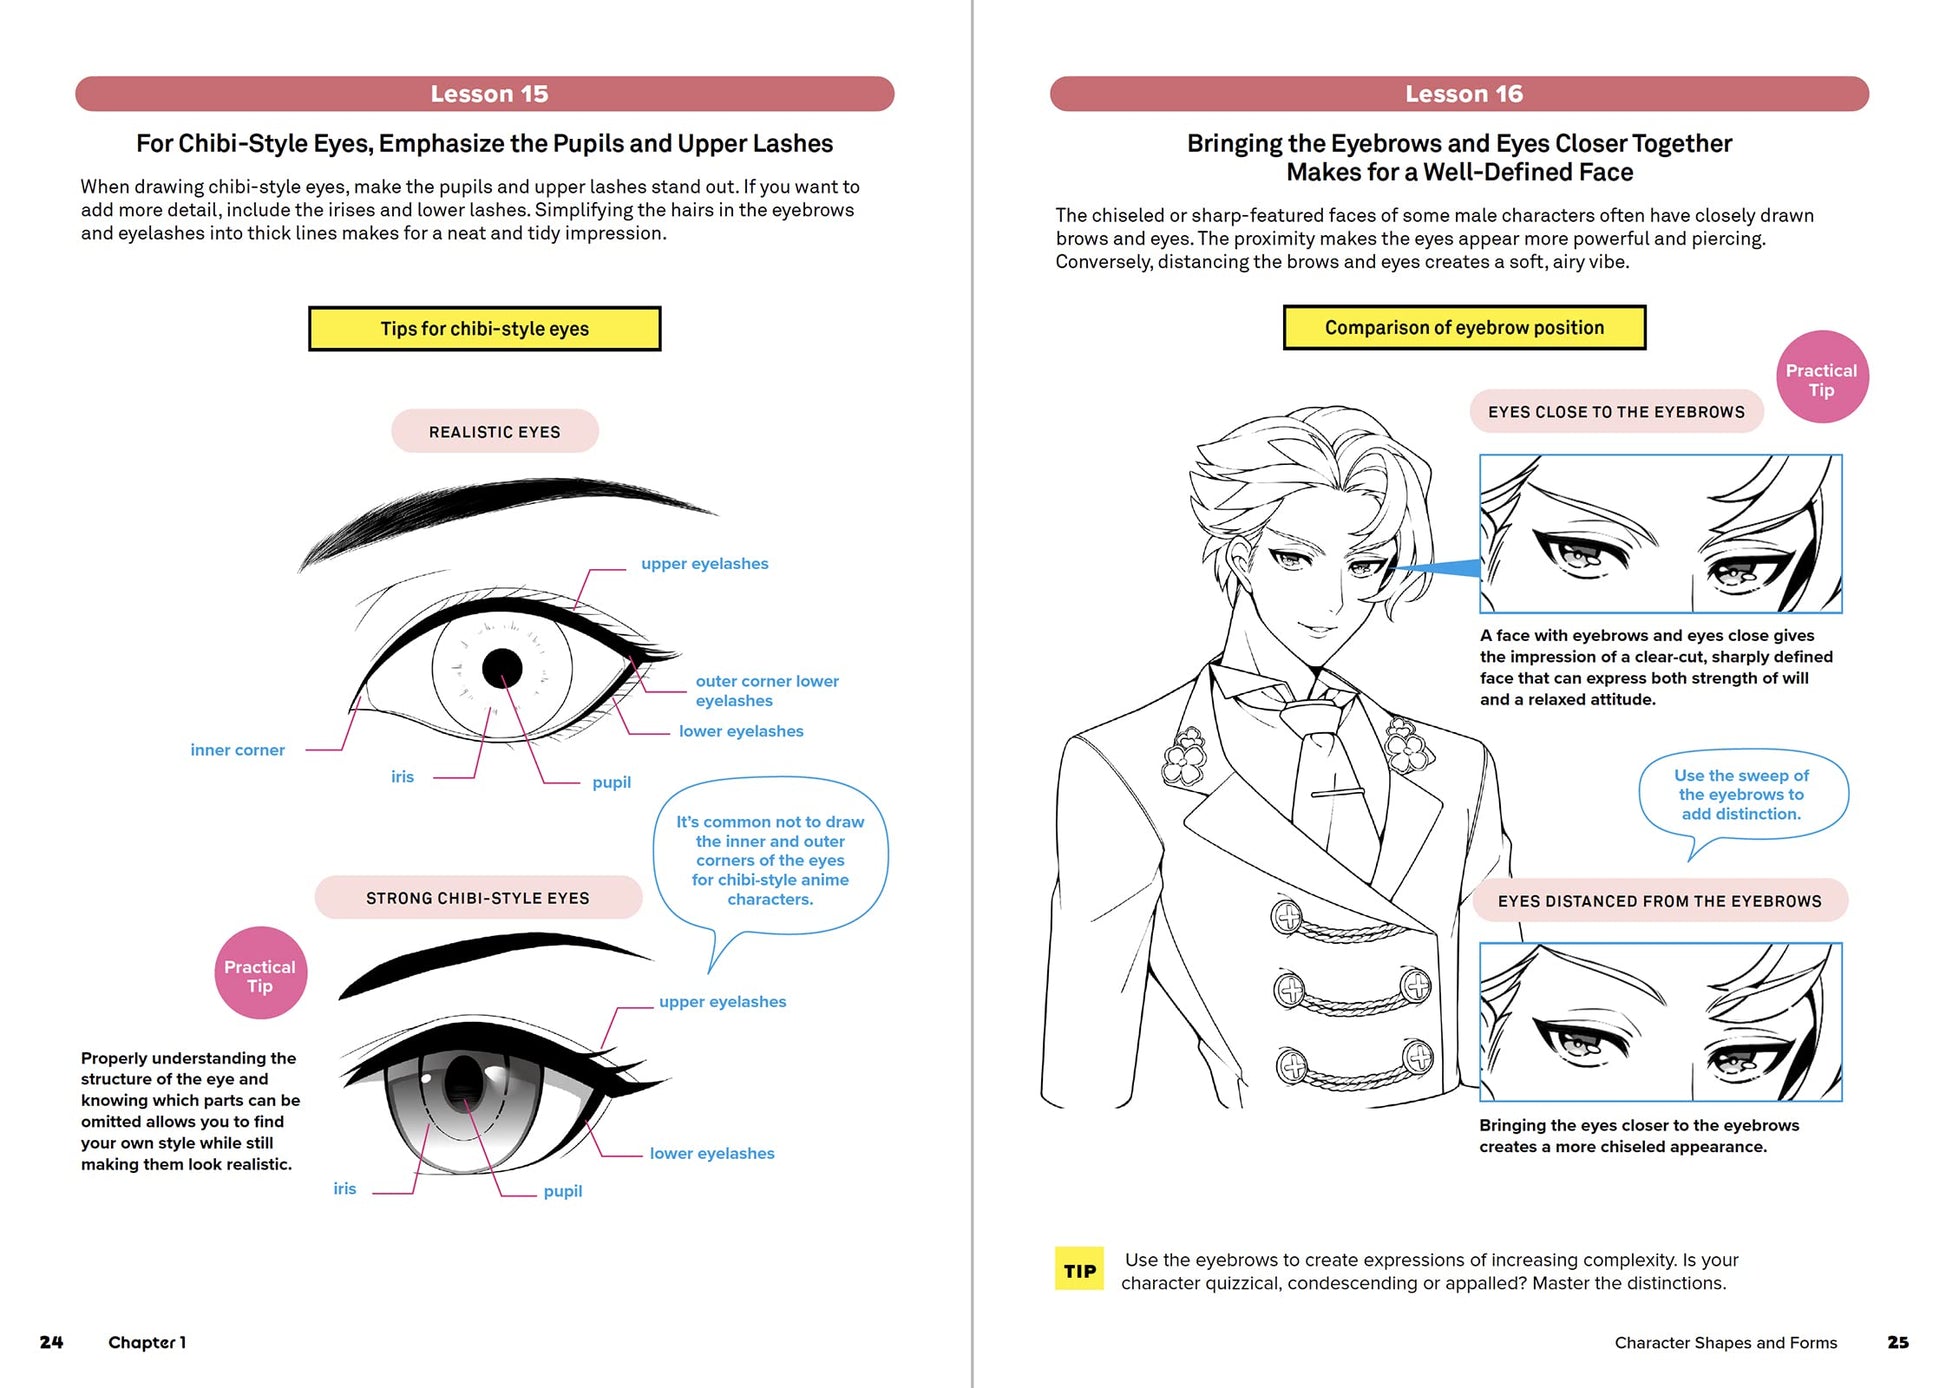 How to Draw Anime and Manga Eyebrows - Easy Tutorial